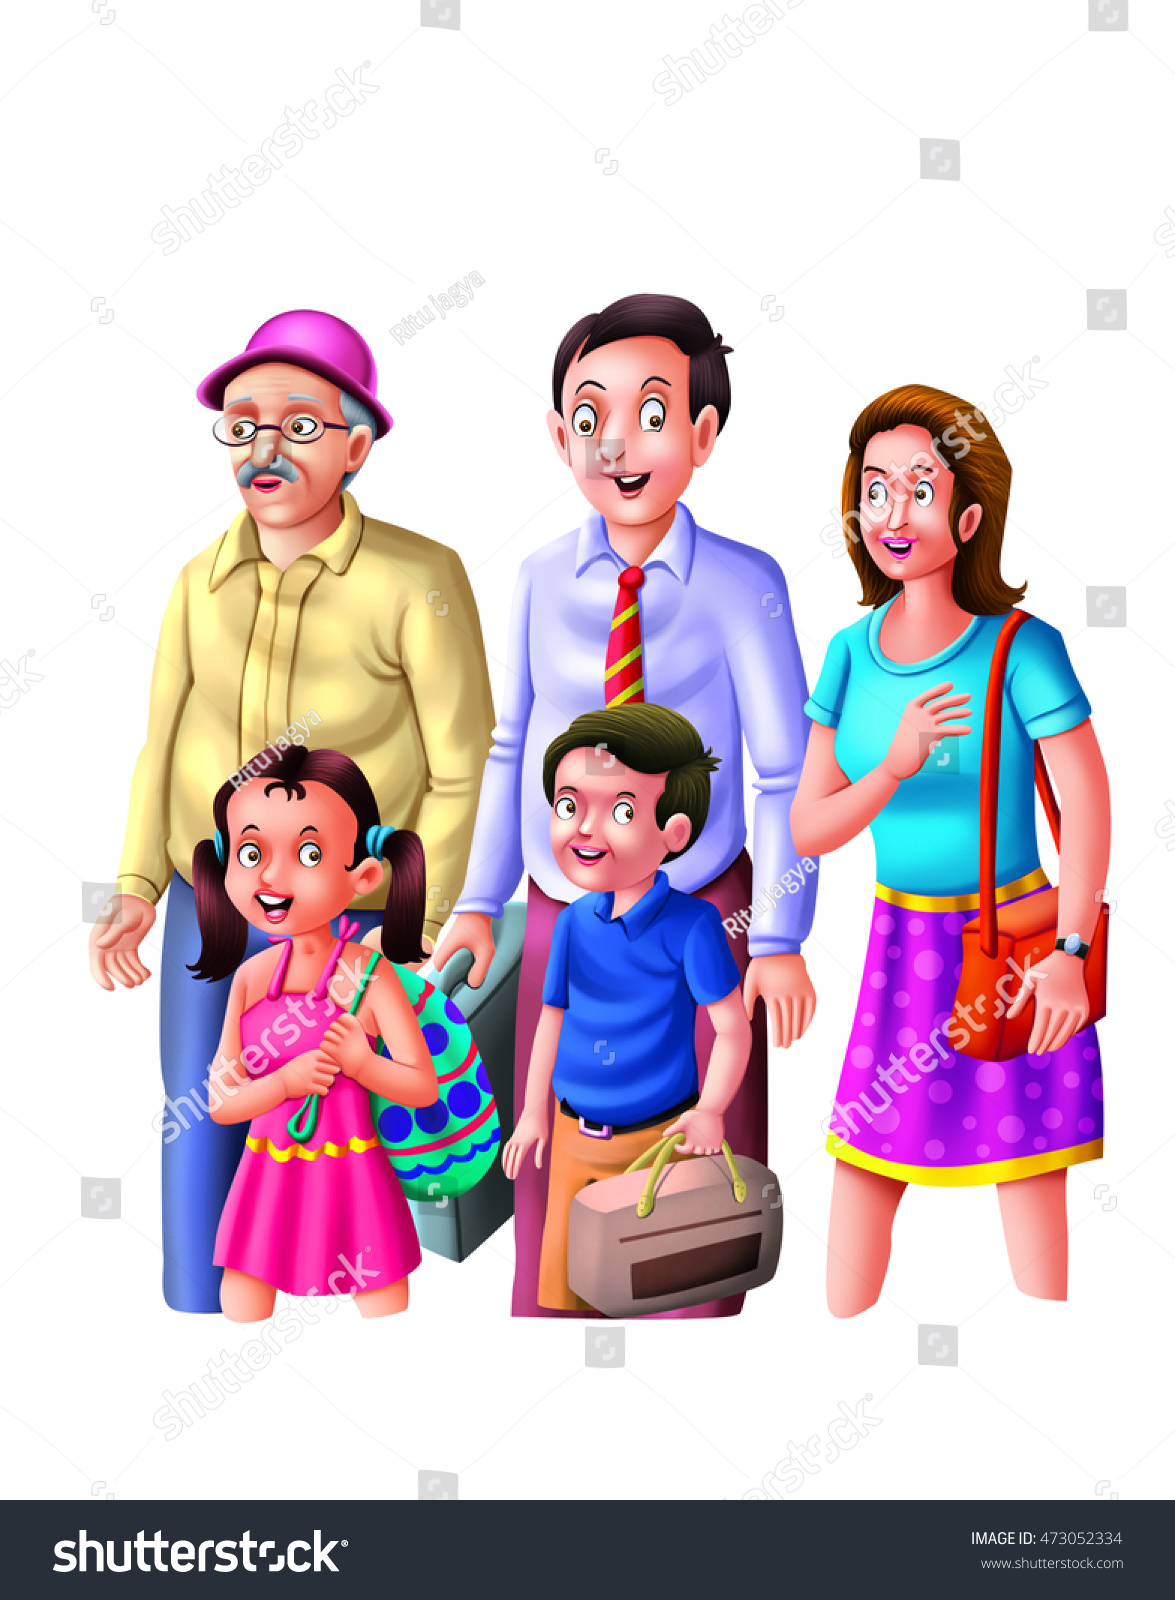 clipart of joint family - photo #20